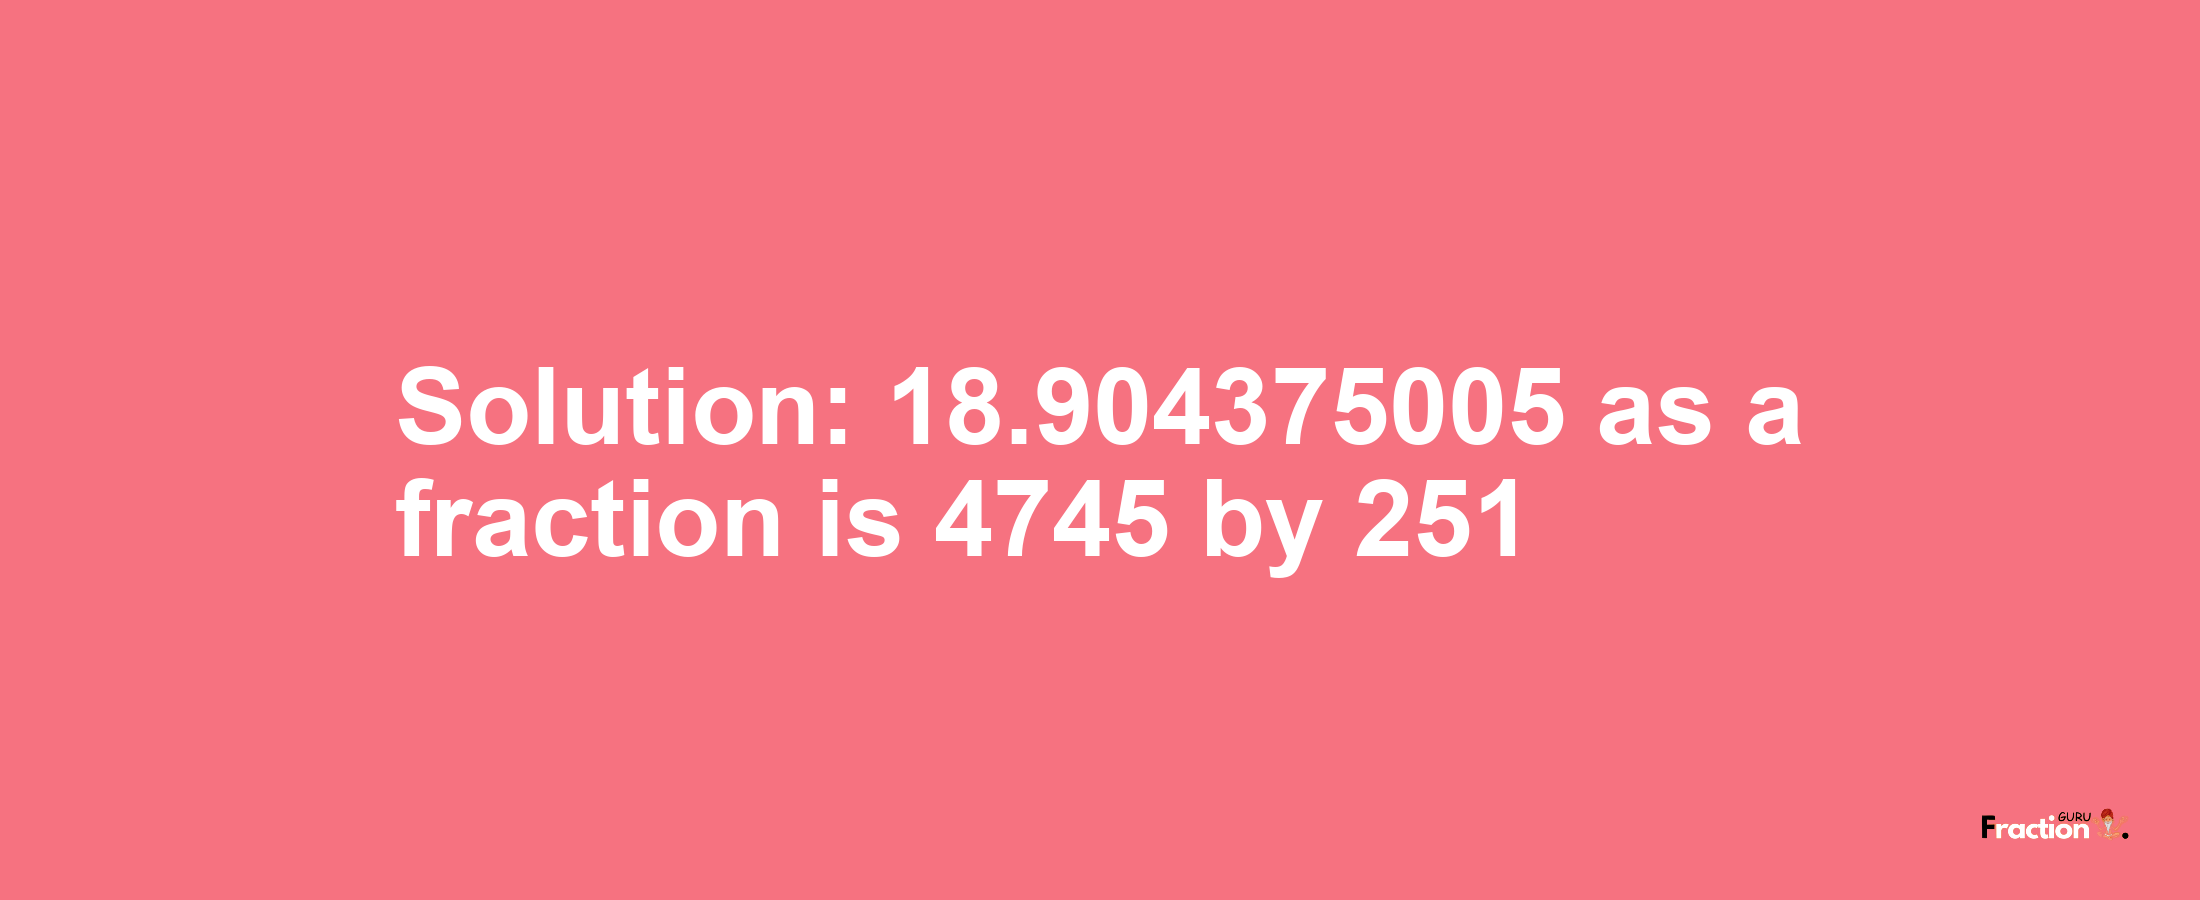 Solution:18.904375005 as a fraction is 4745/251